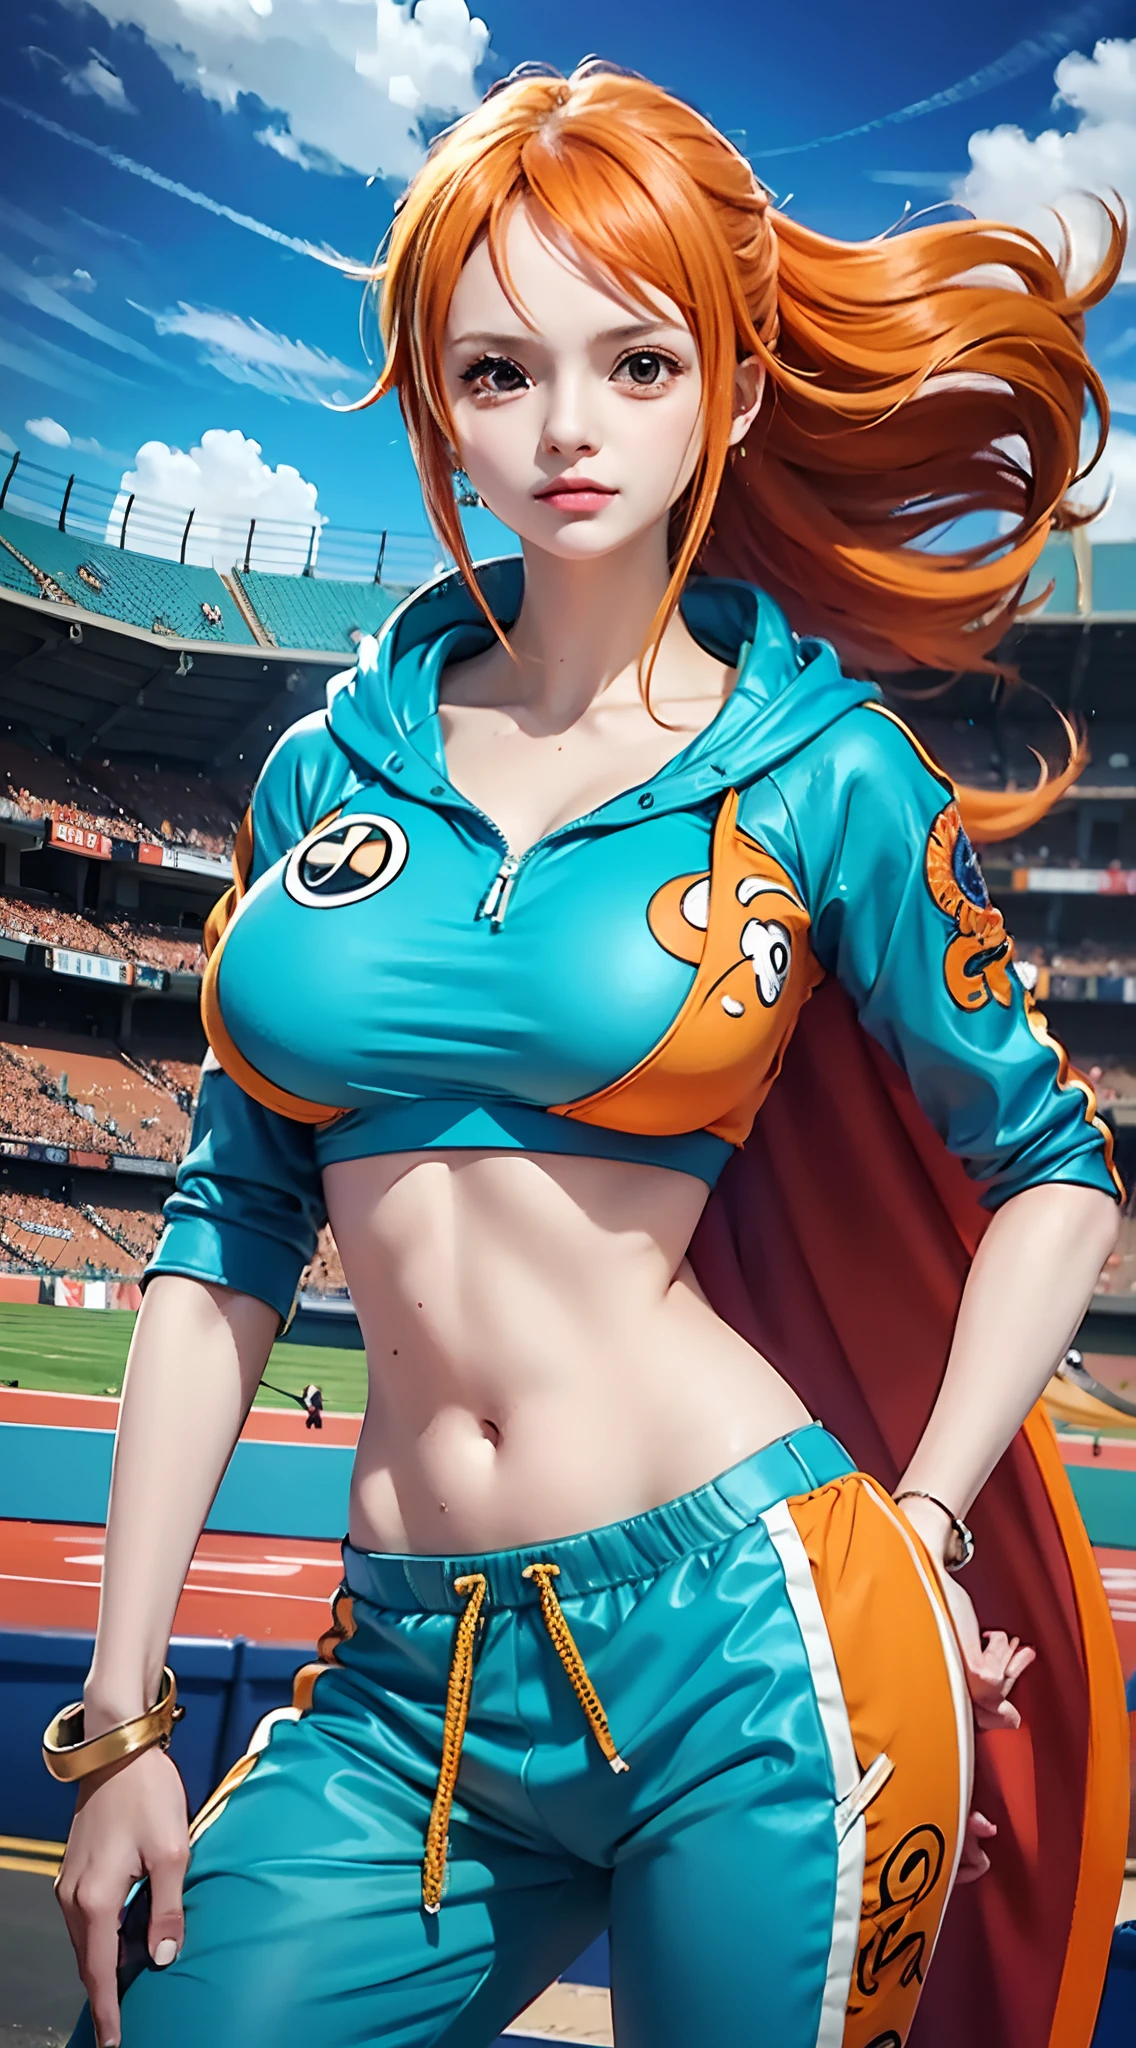 nami from anime one piece, beautiful woman, woman, very beautiful, orange hair, long hair, perfect body, perfect , wearing blue hoodie, blue jogger pants, orange nikes, on the ball field, football stadium, standing, masterpiece, textured skin, super detail, high details, high quality, best quality, HD, 16k